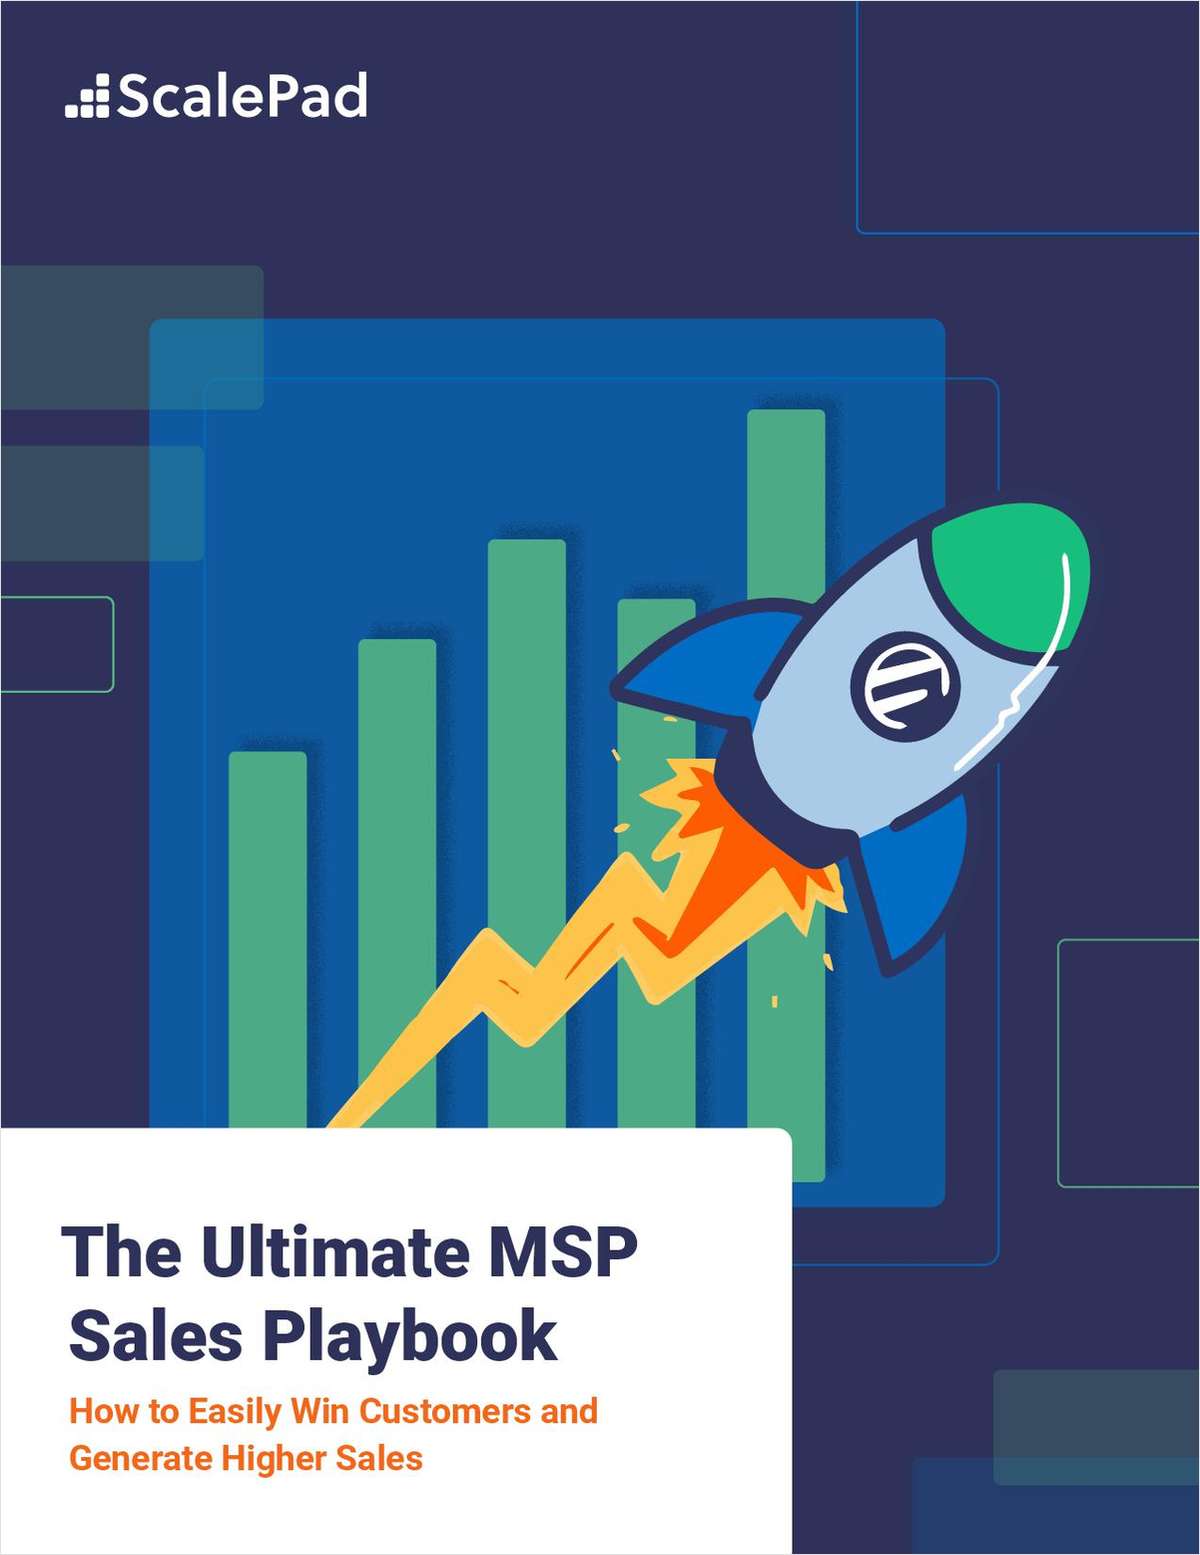 The Ultimate MSP Sales Playbook: How to Easily Win Customers and Generate Higher Sales